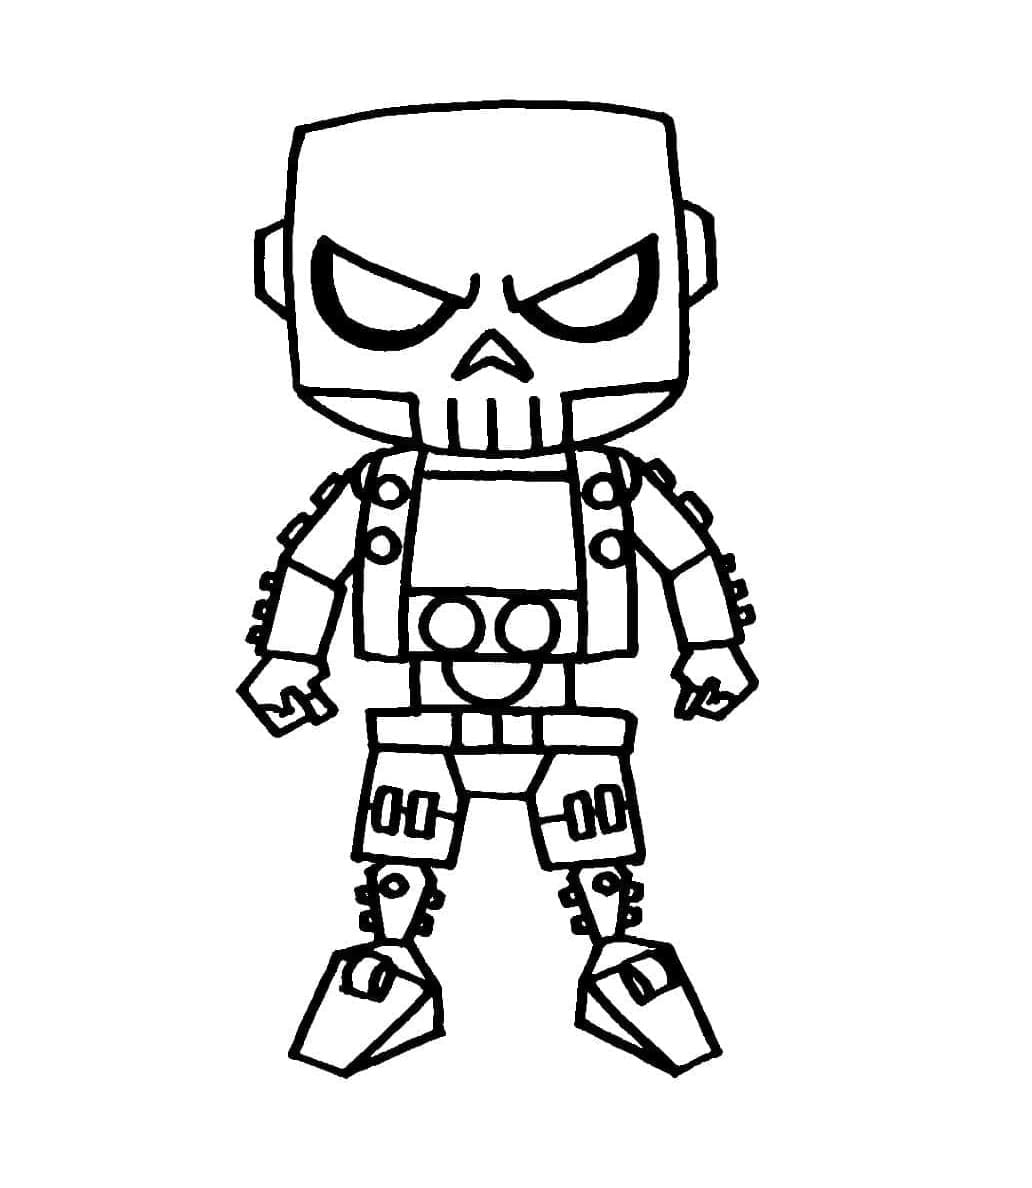 Printable Free Fire Rei Caveira Lego Coloring Page